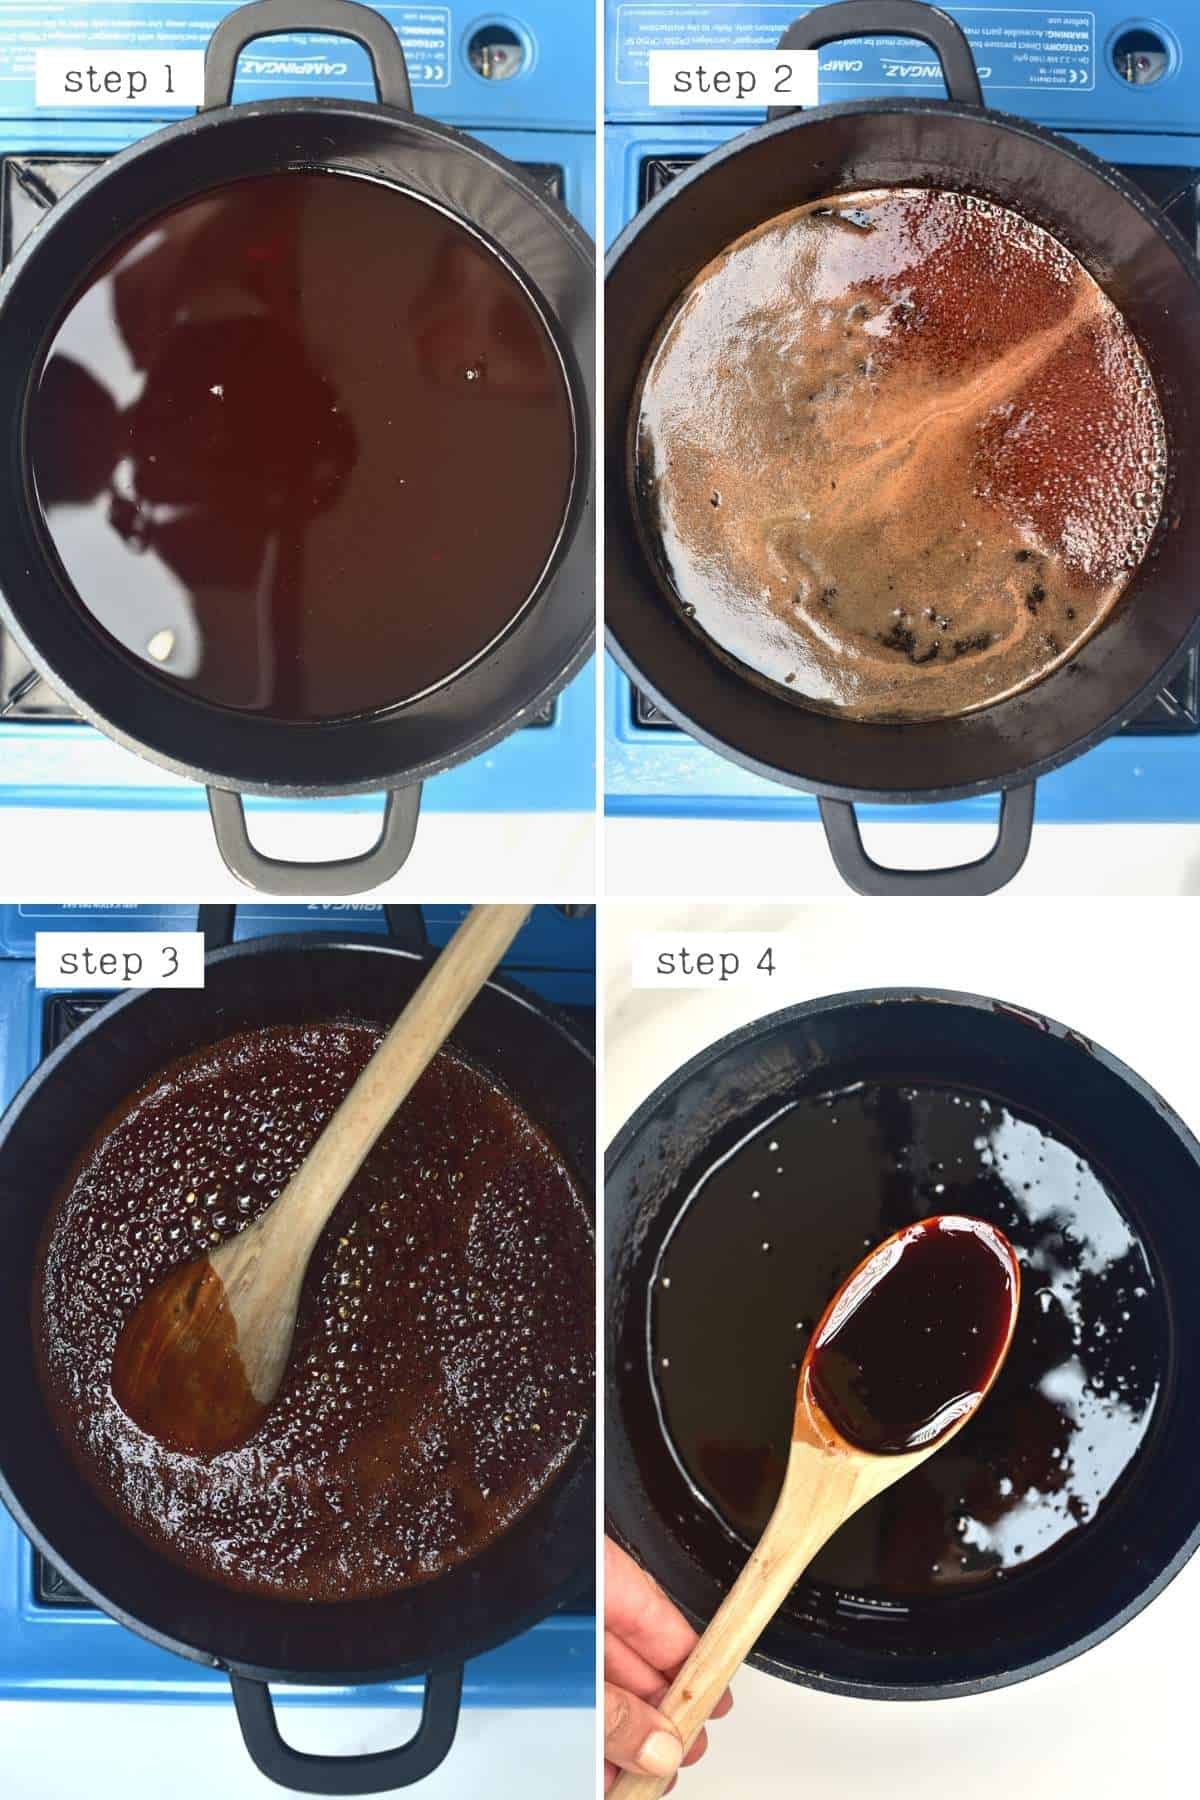 Steps for making homemade date syrup